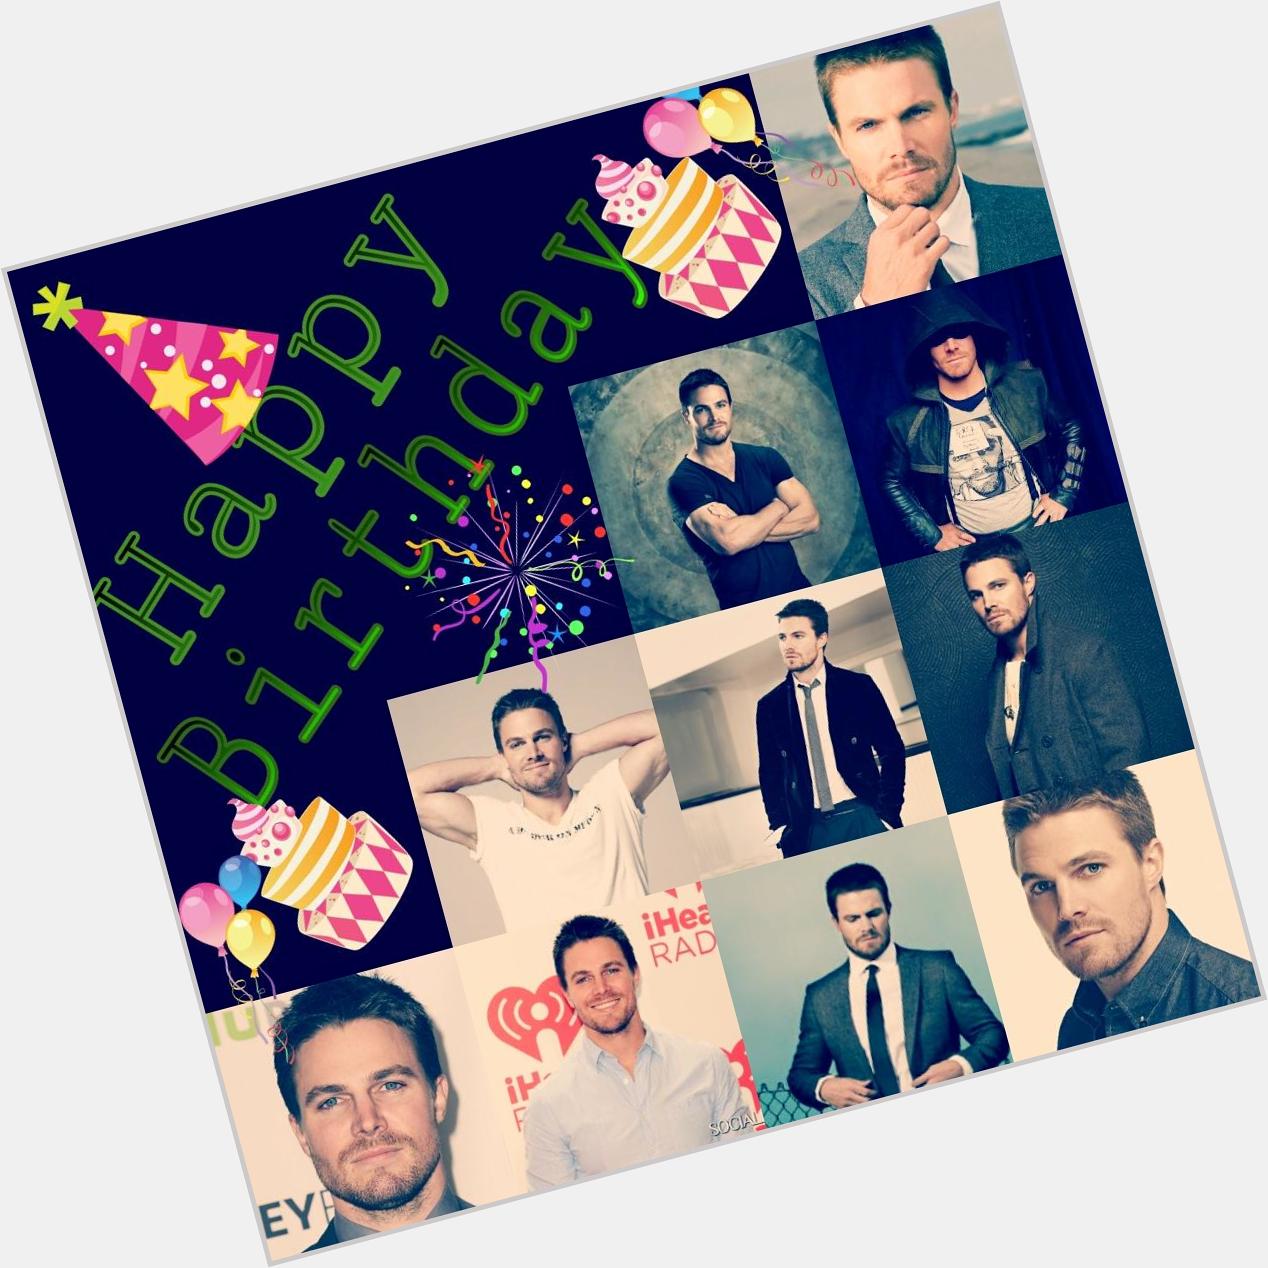  Happy Birthday Stephen Amell May you achieve everything in your life
Stay Blessed Sir 
Have a Blast 